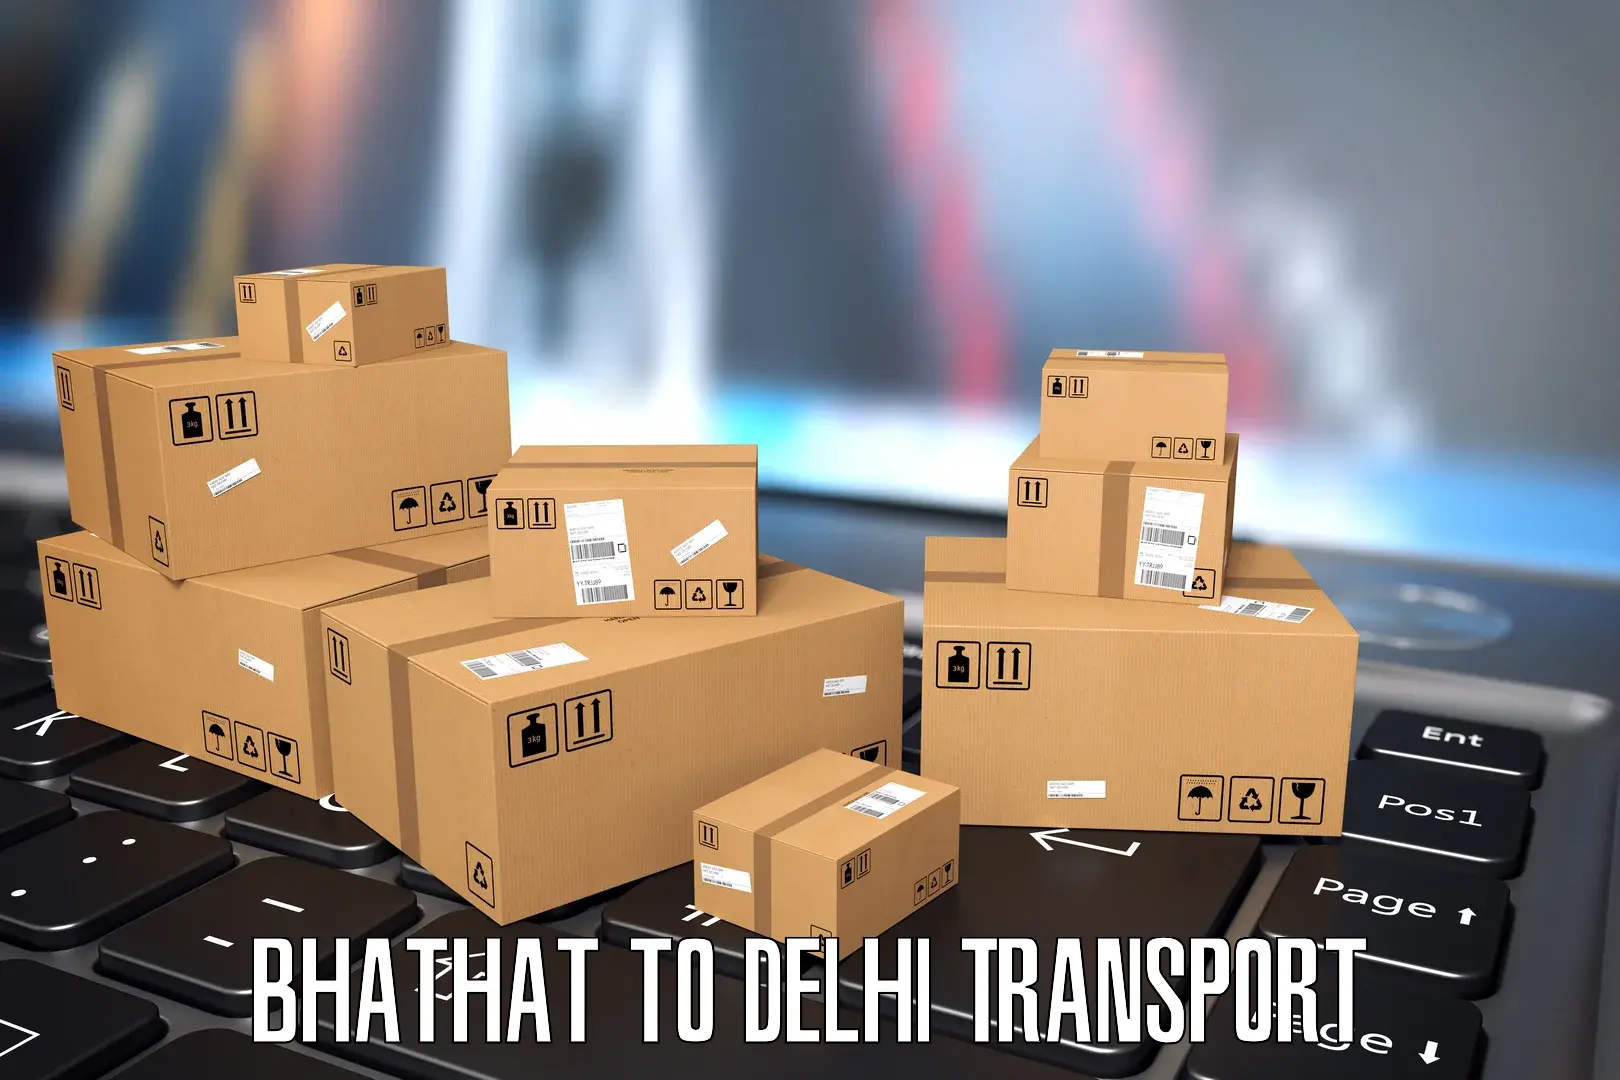 Transport shared services Bhathat to Burari